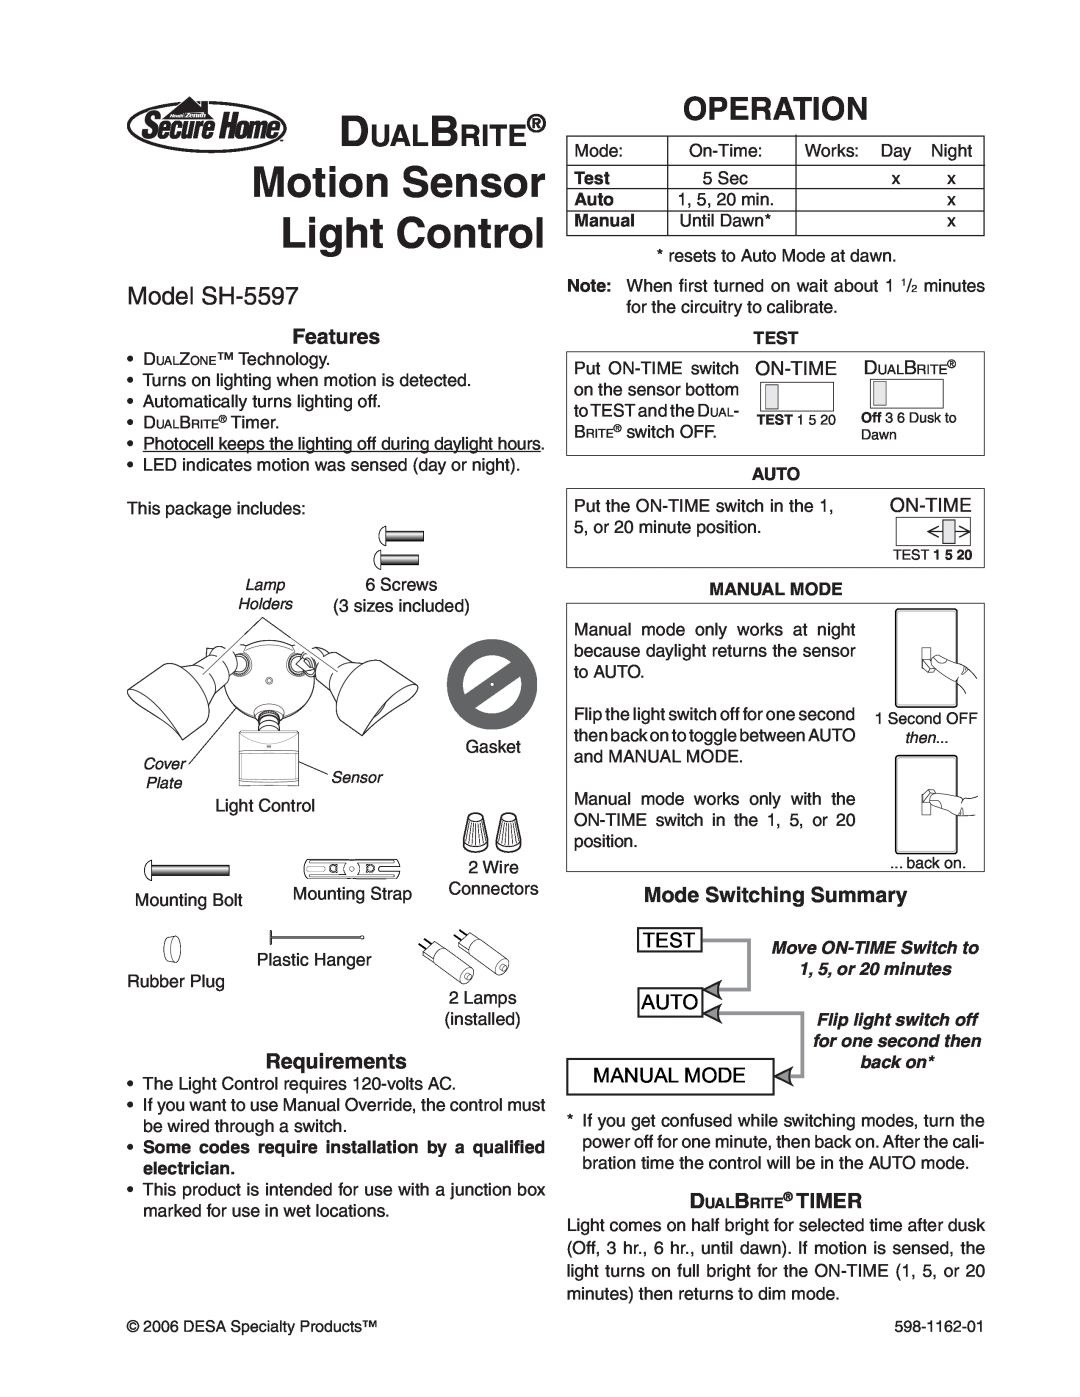 Desa manual Motion Sensor Light Control, Operation, Model SH-5597, Features, Requirements, Dualbrite Timer, On-Time 